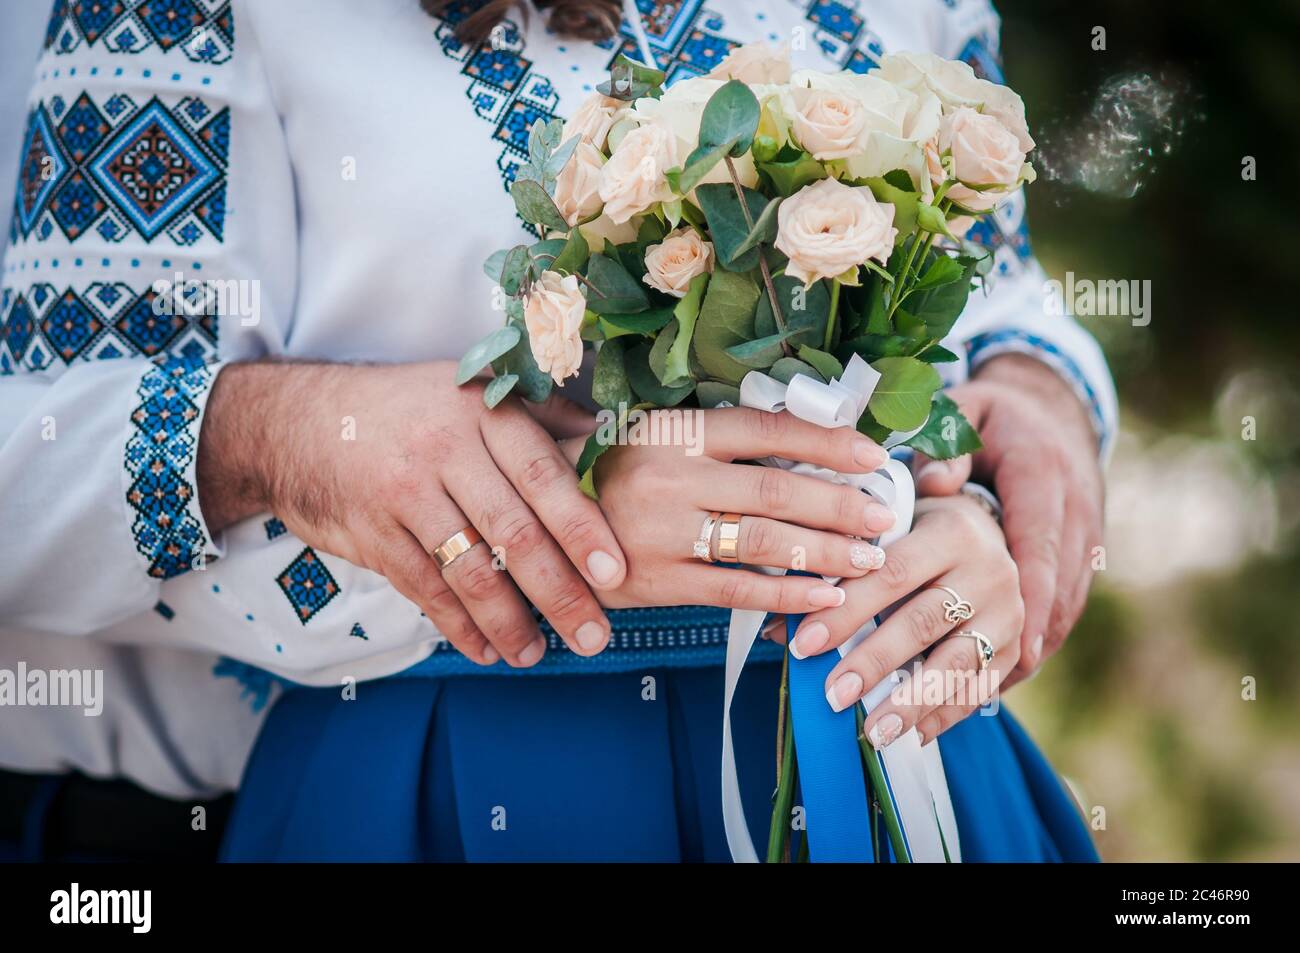 Colorfull wedding bouquet in the hands of bride Stock Photo